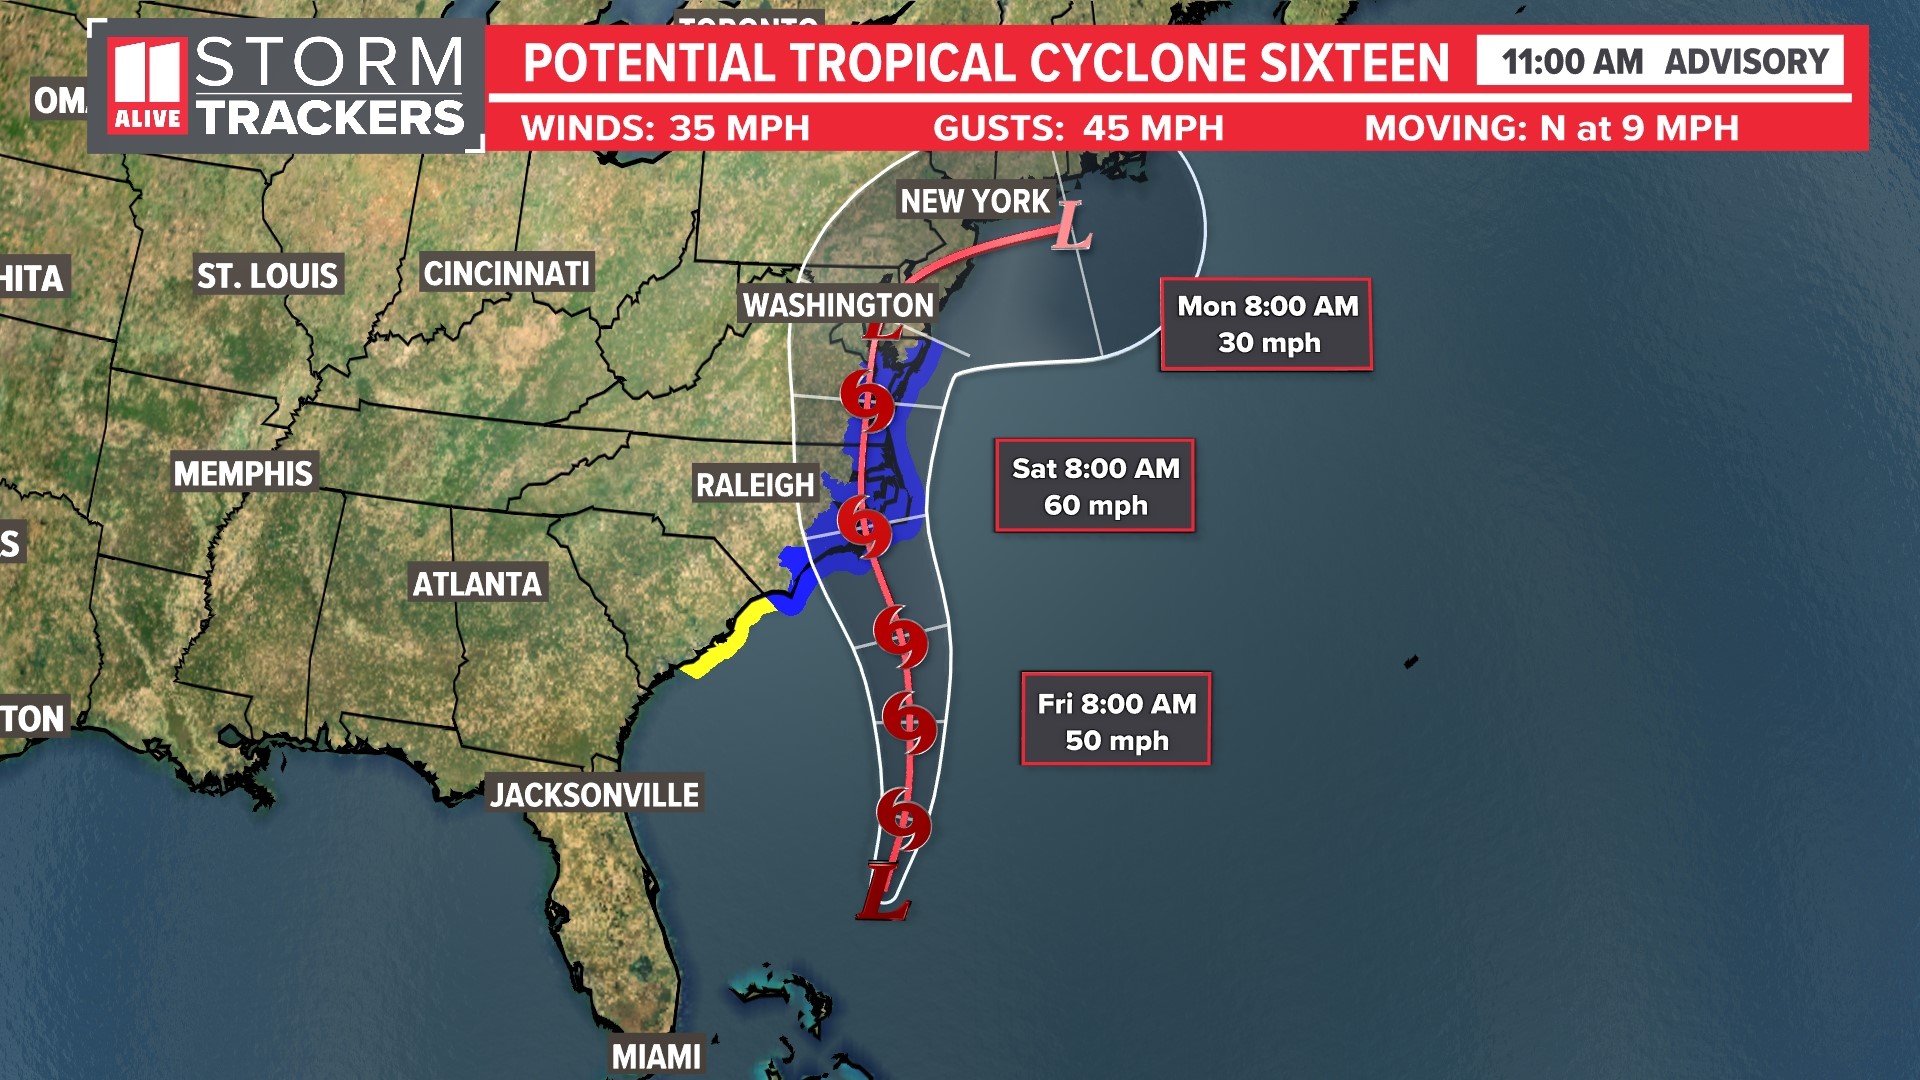 Tropical storm warnings issued as Tropical Cyclone 16 forms off our coast,  ready to push rain over ENC